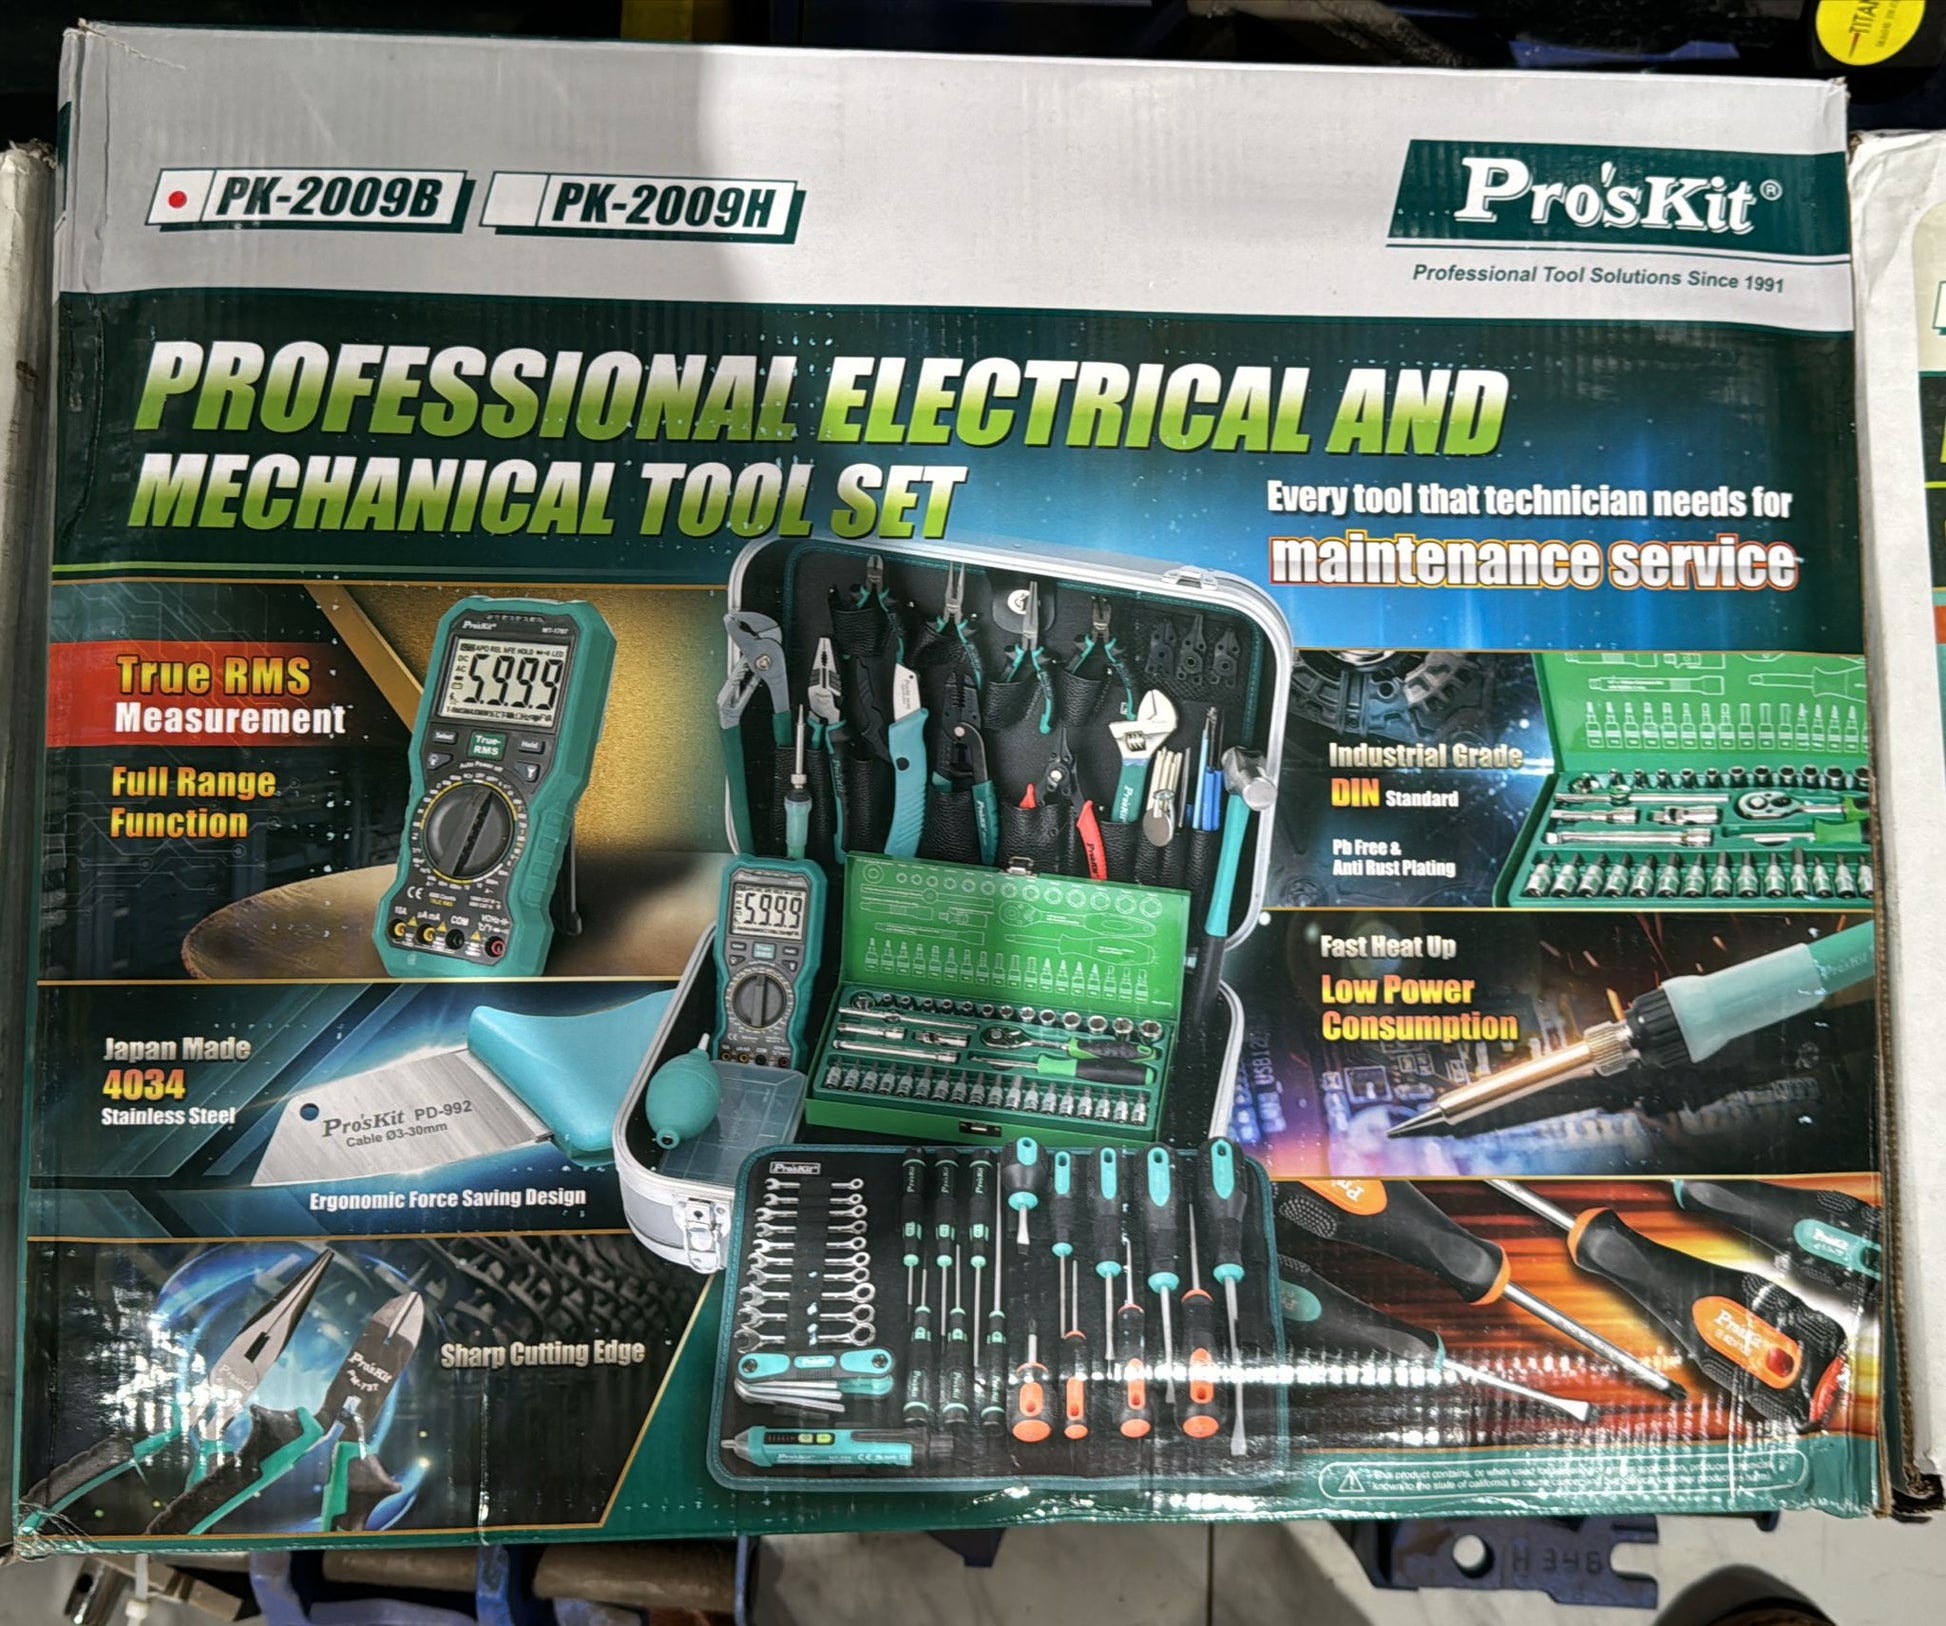 Pro'skit PK-2009B, the professional electrical and mechanical tool set